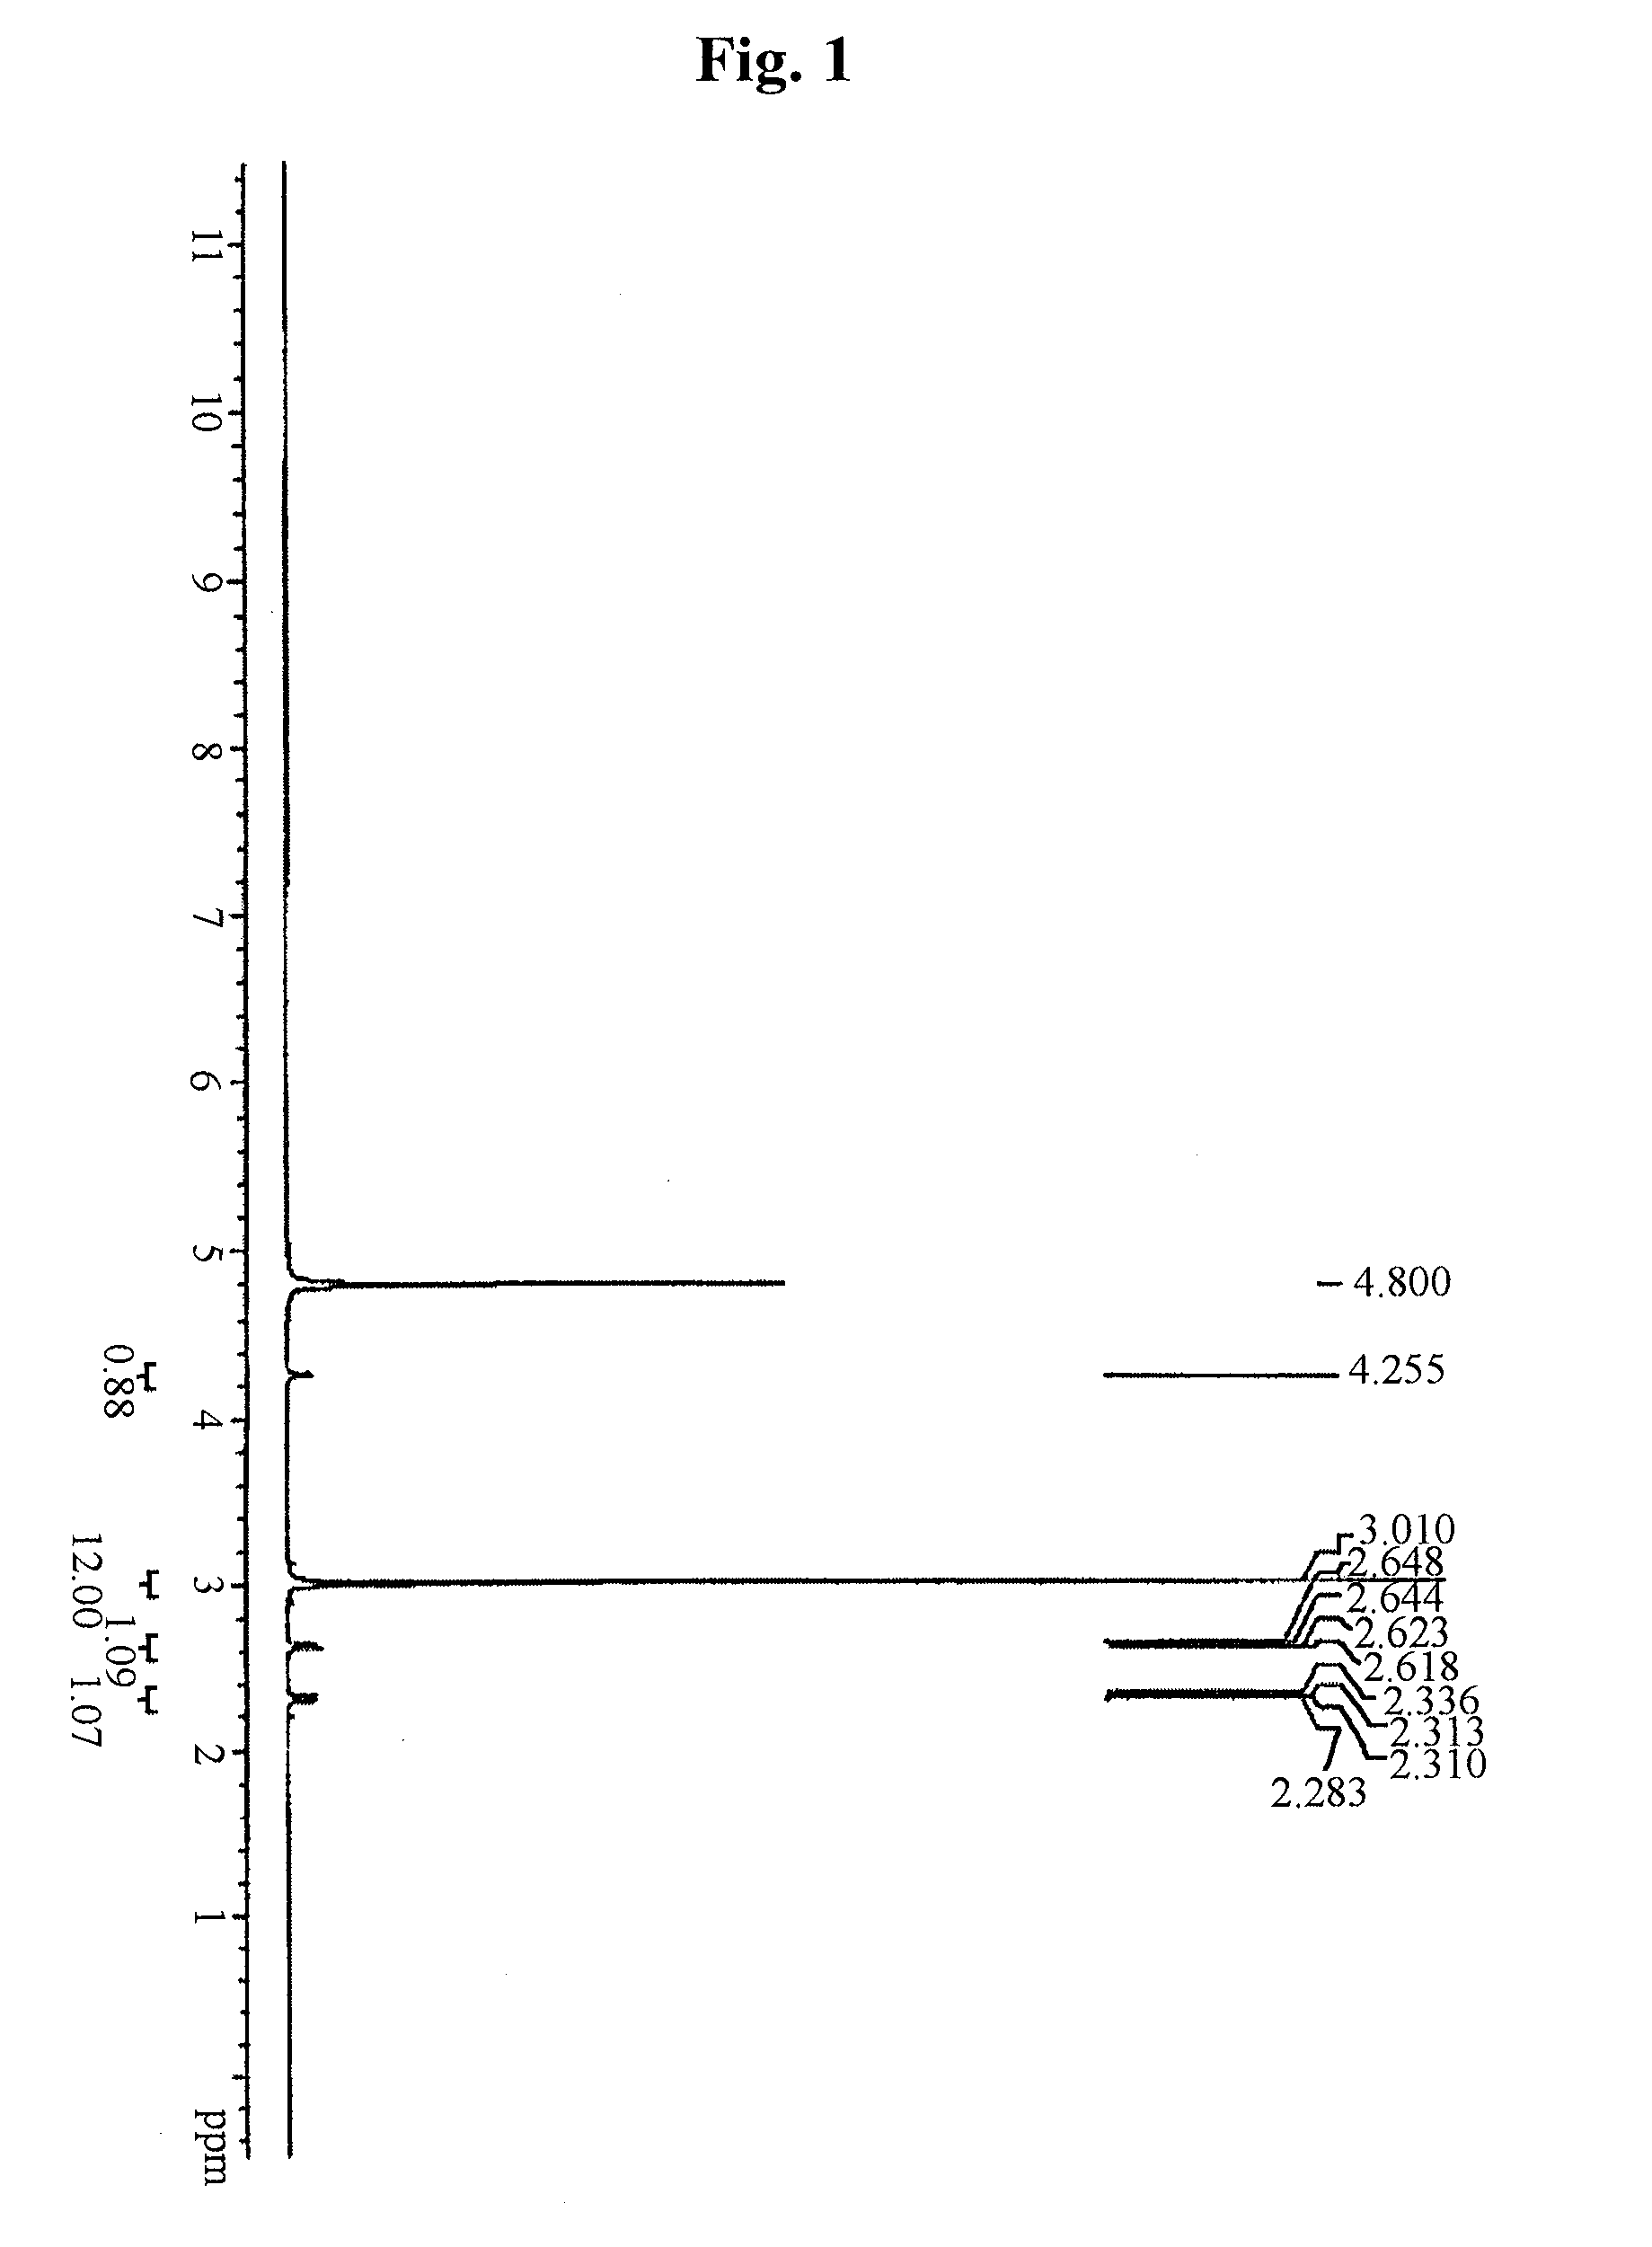 N,n-dimethyl imidodicarbonimidic diamide dicarboxylate, method for producing the same and pharmaceutical compositions comprising the same